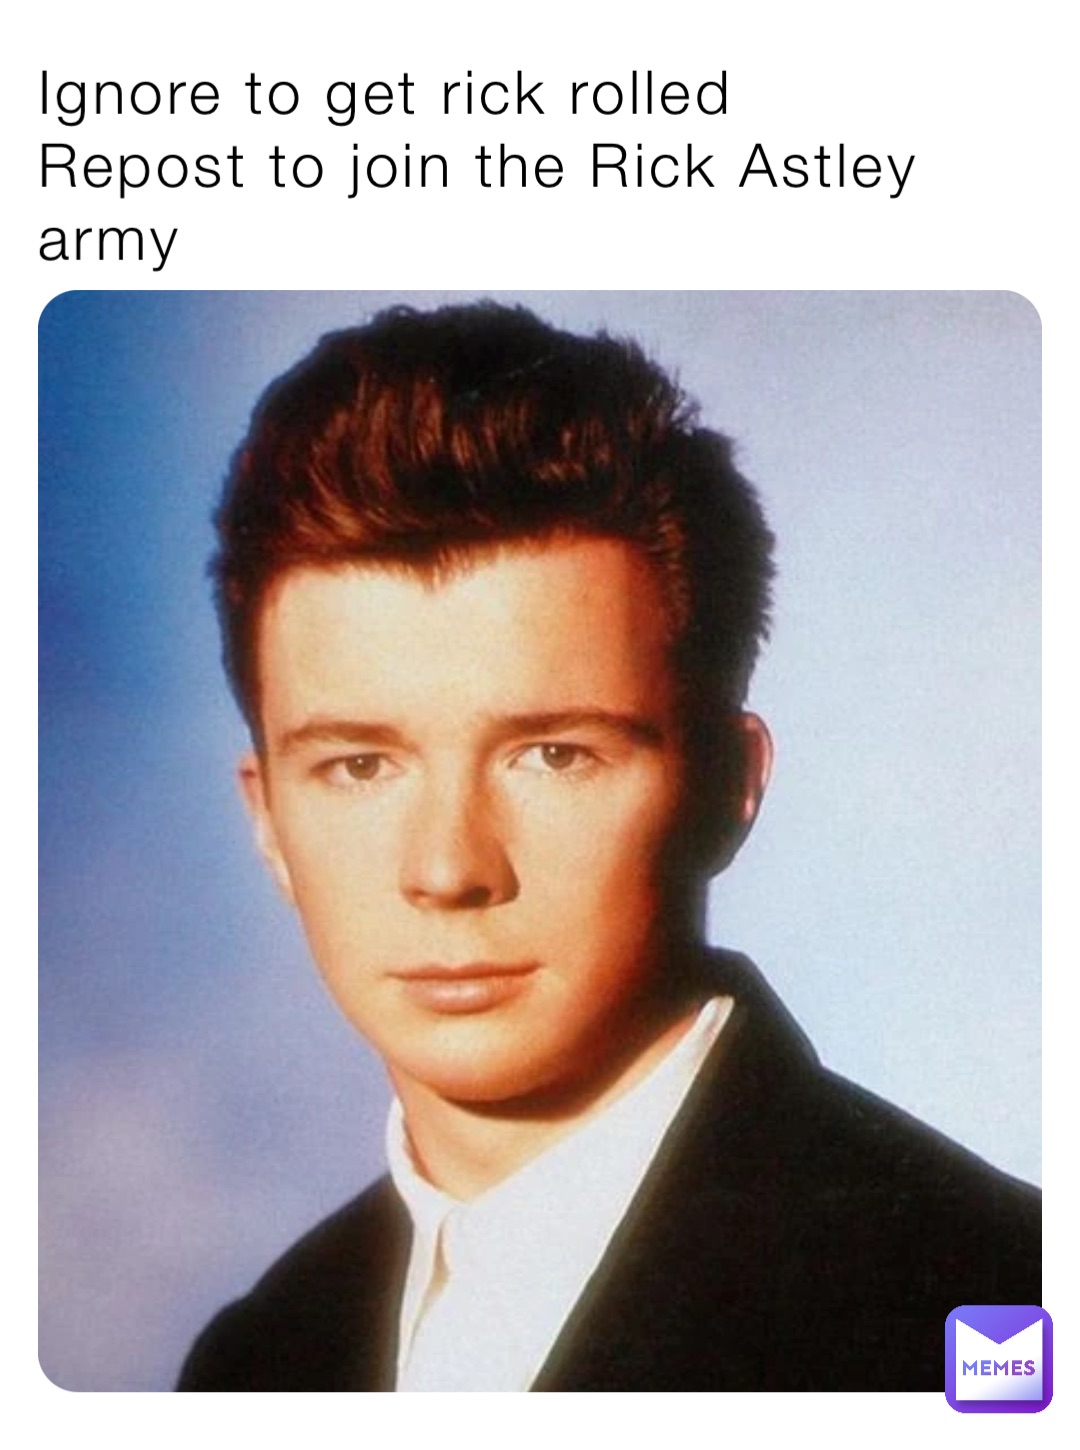 Ignore to get rick rolled
Repost to join the Rick Astley army